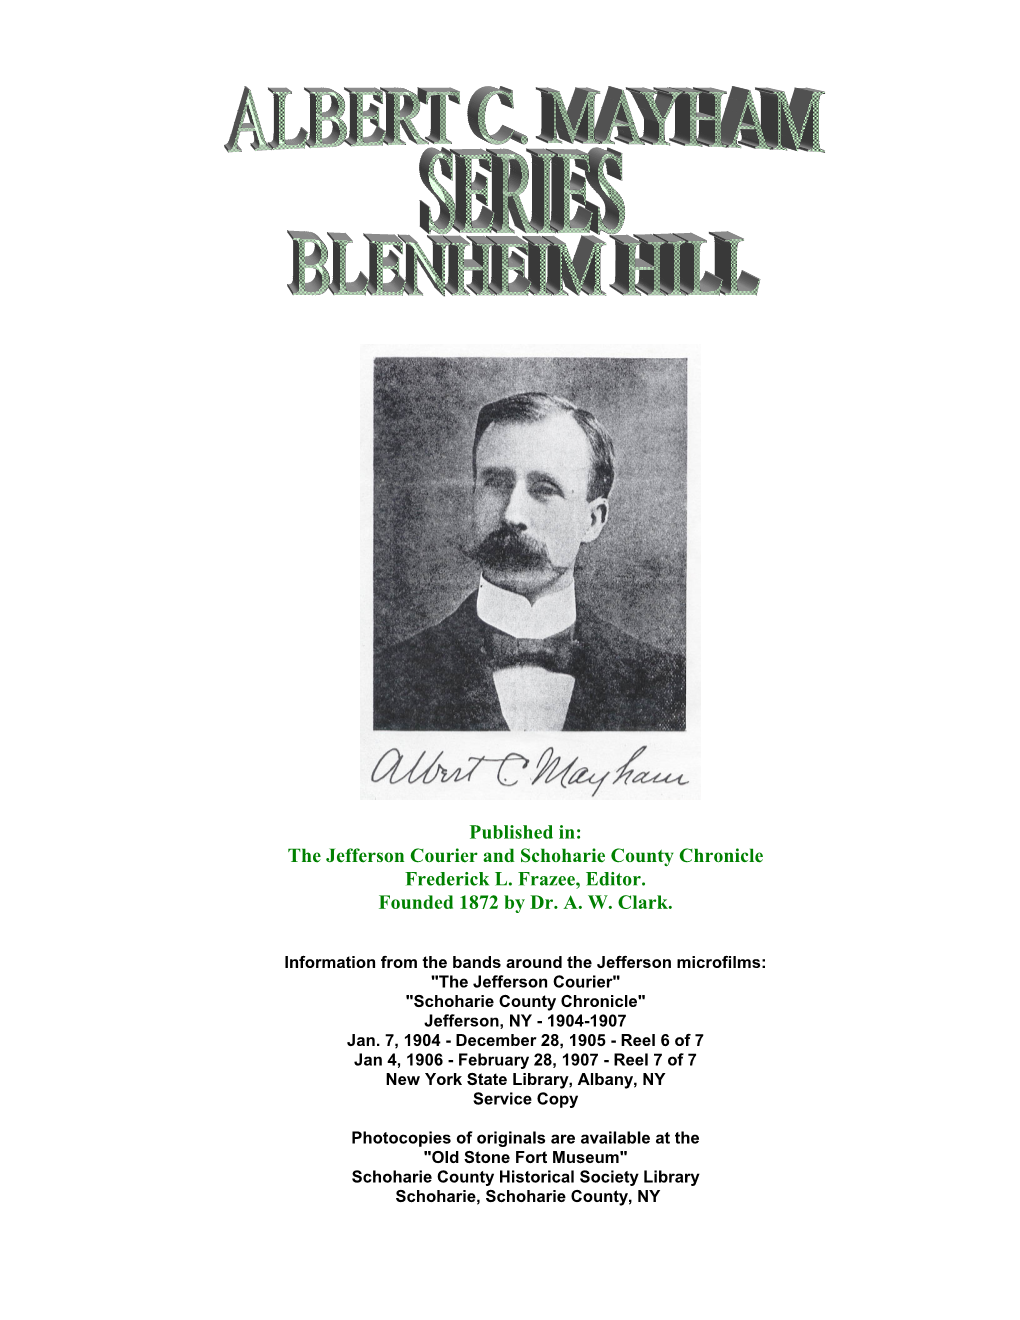 History of Blenheim Hill” the Jefferson Courier and Schoharie County Chronicle April 13, 1905